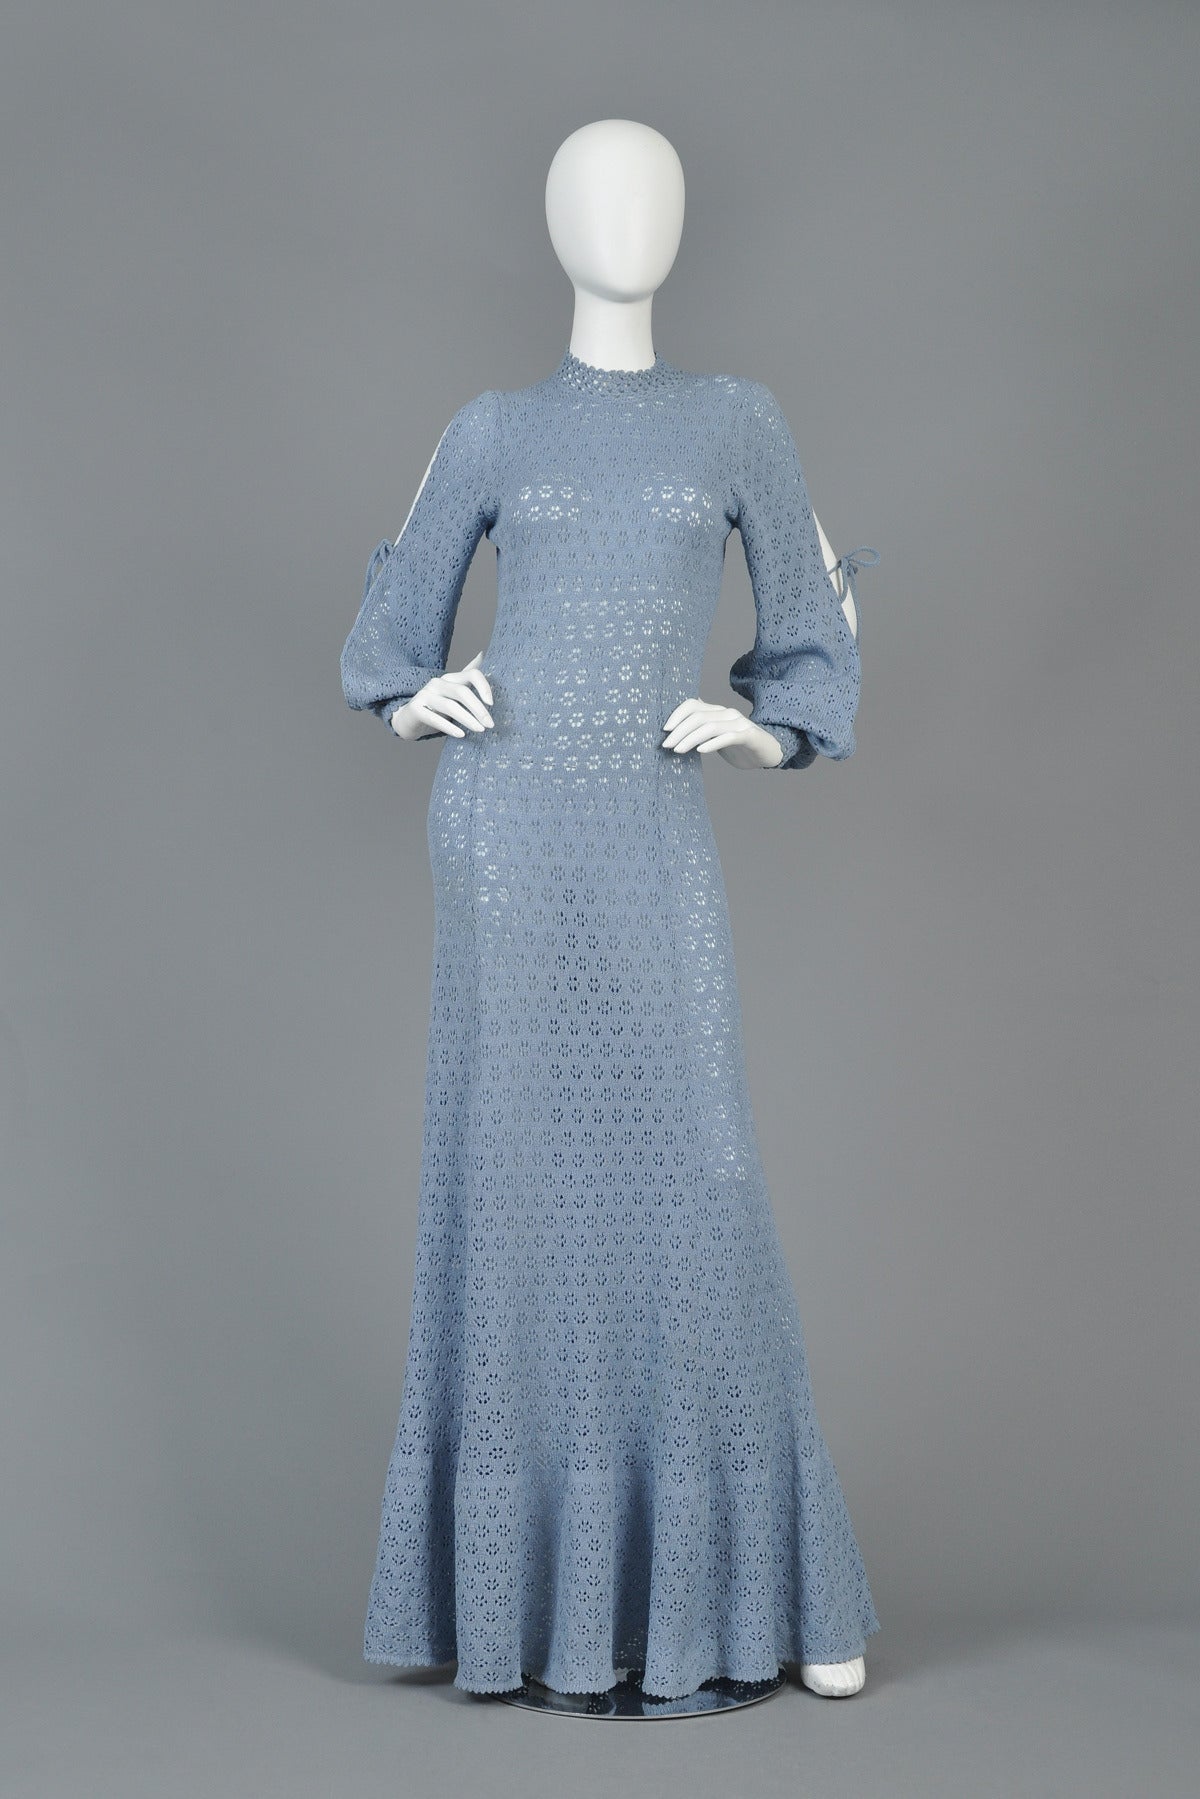 Incredible 1970's open weave knit dress. AMAZING cornflower blue color with tiny open weave florals that almost look crocheted. Ultra slinky fit with flared mermaid hem and gorgeous open bishop sleeves that tie around the elbow. Elbow ties can be